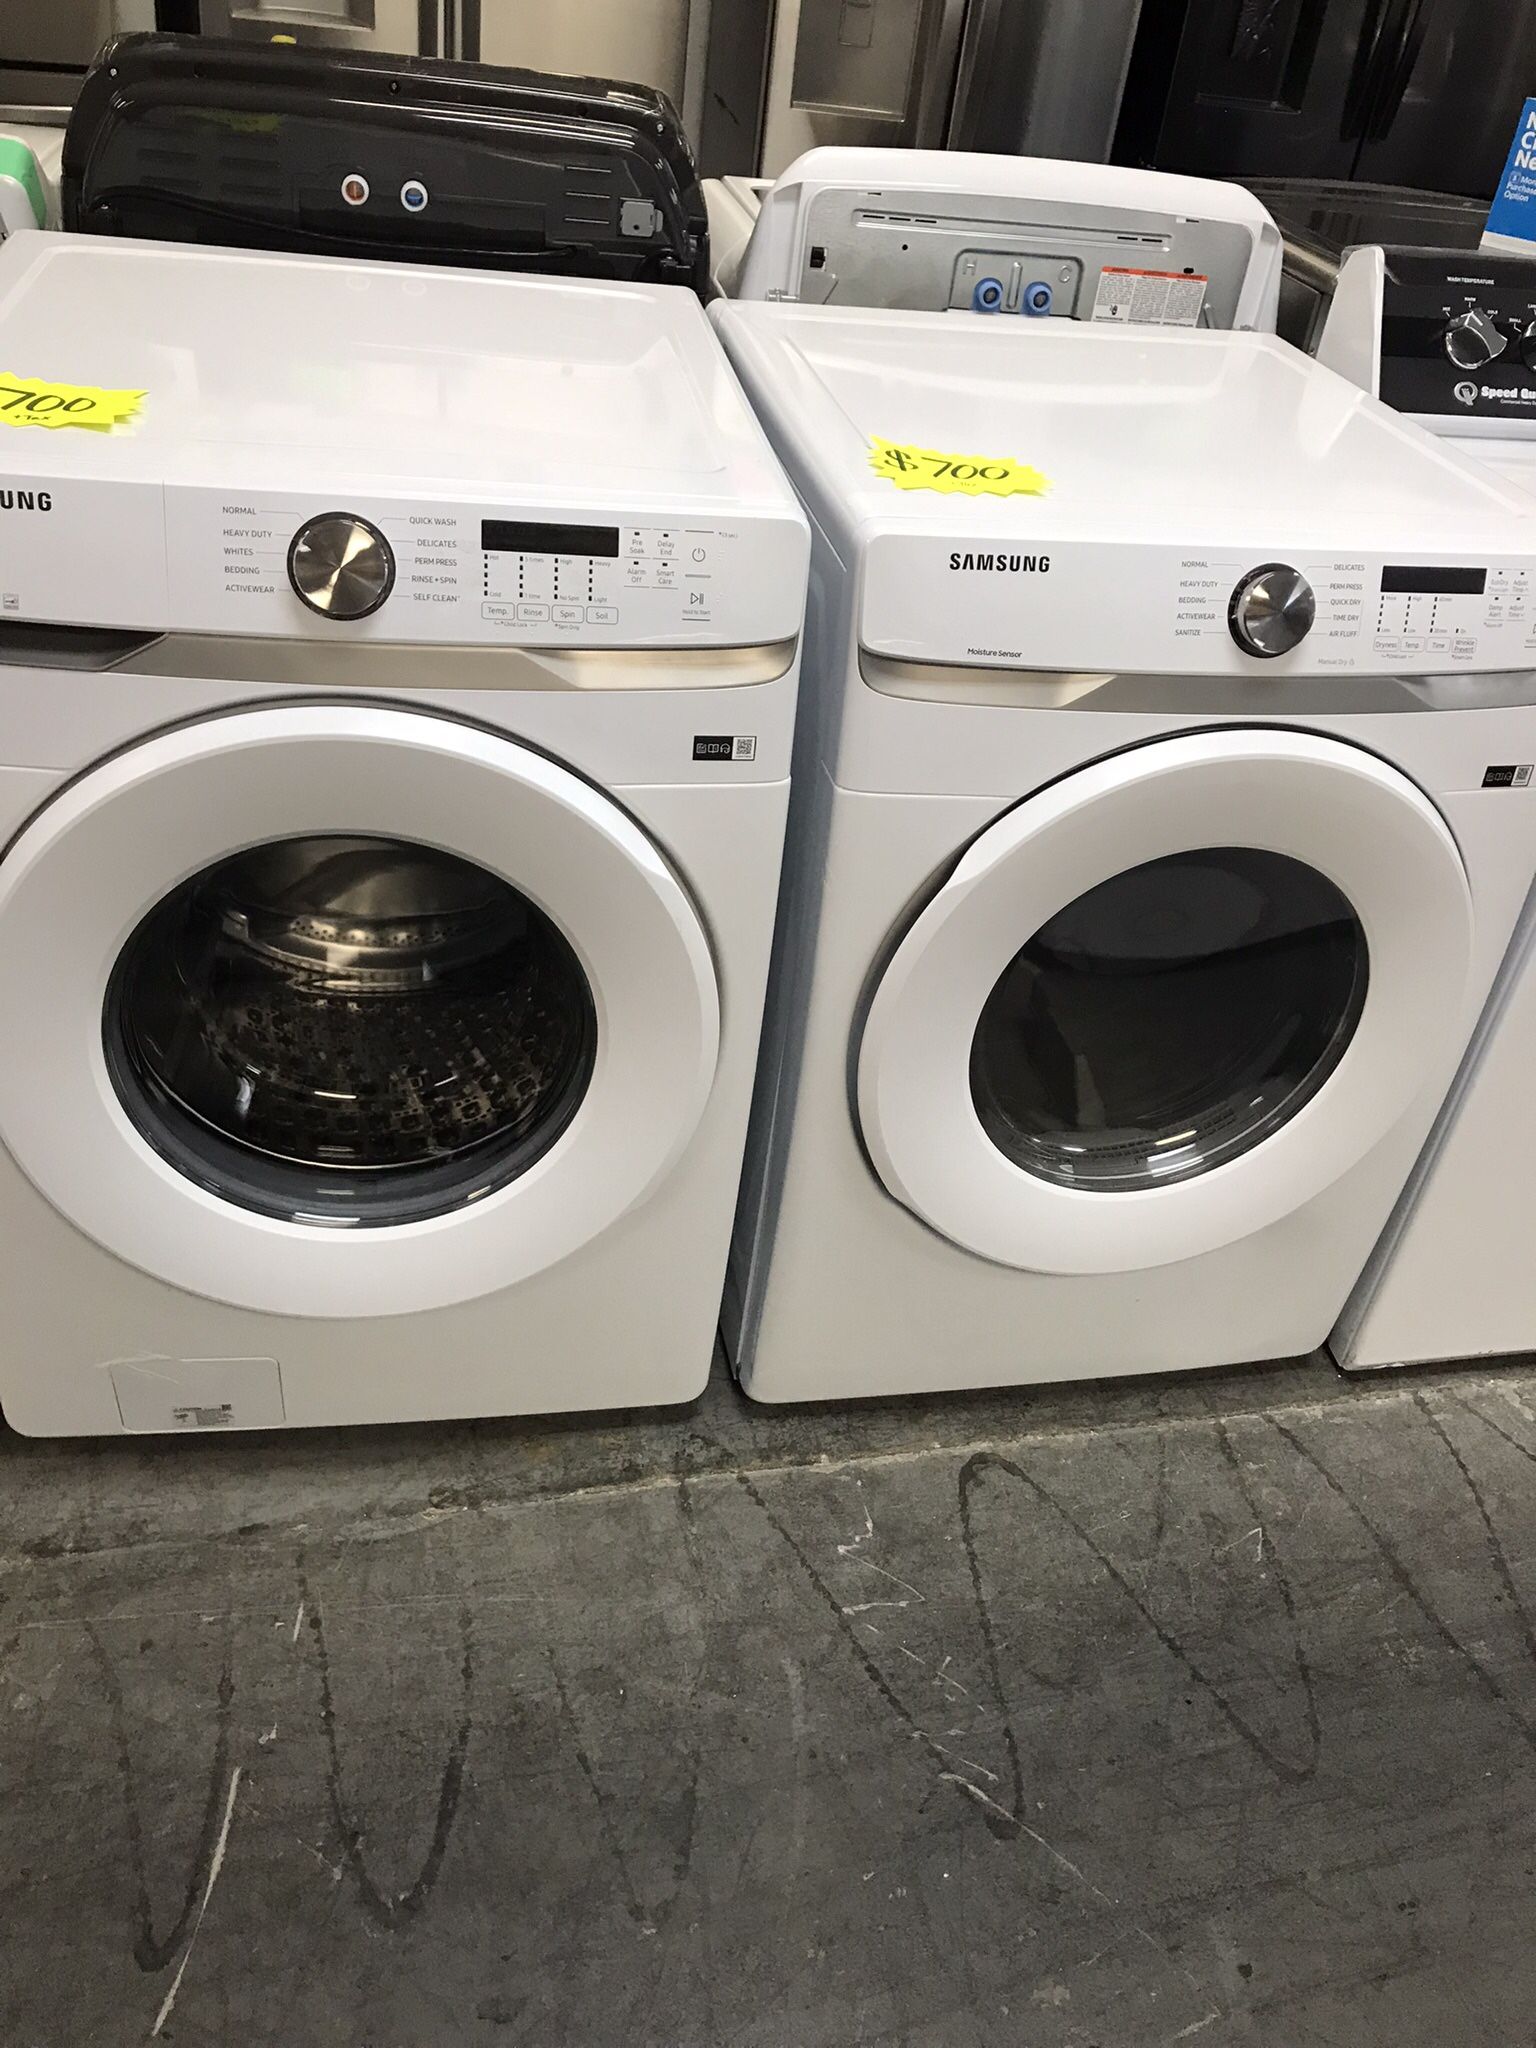 SAMSUNG FRONT LOADER WASHER AND GAS DRYER SET BRAND NEW OPEN BOX 